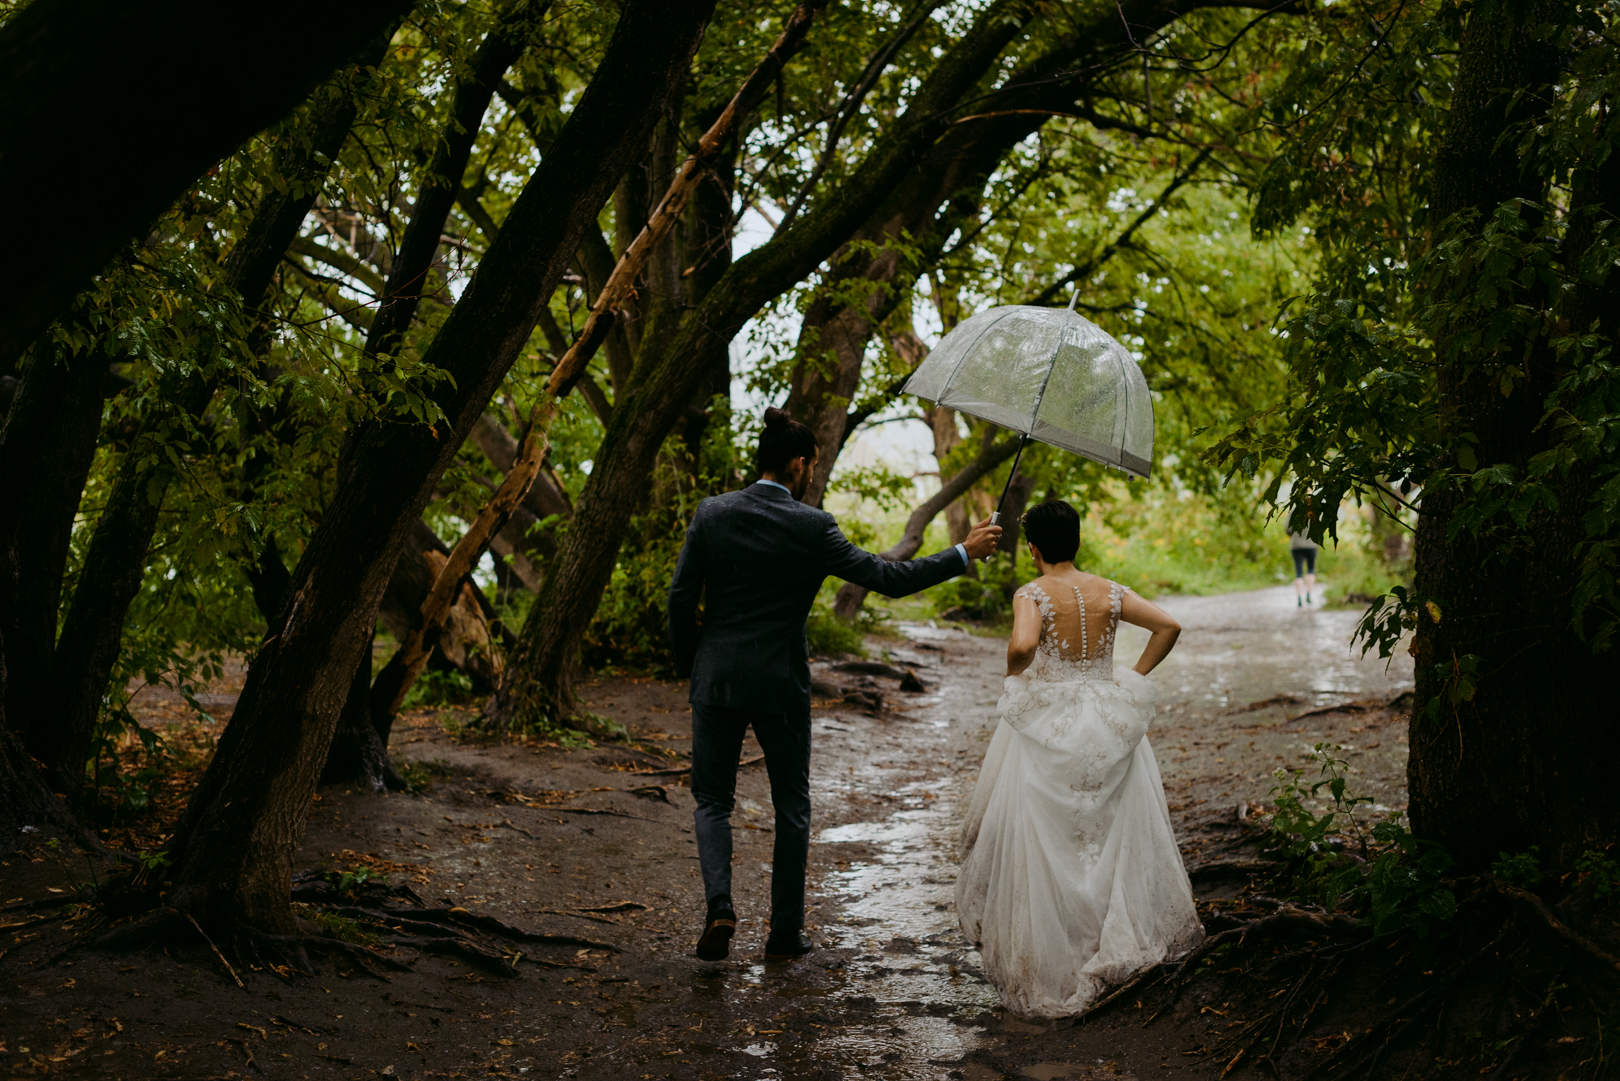 bride and groom walking under tree canopy in the rain